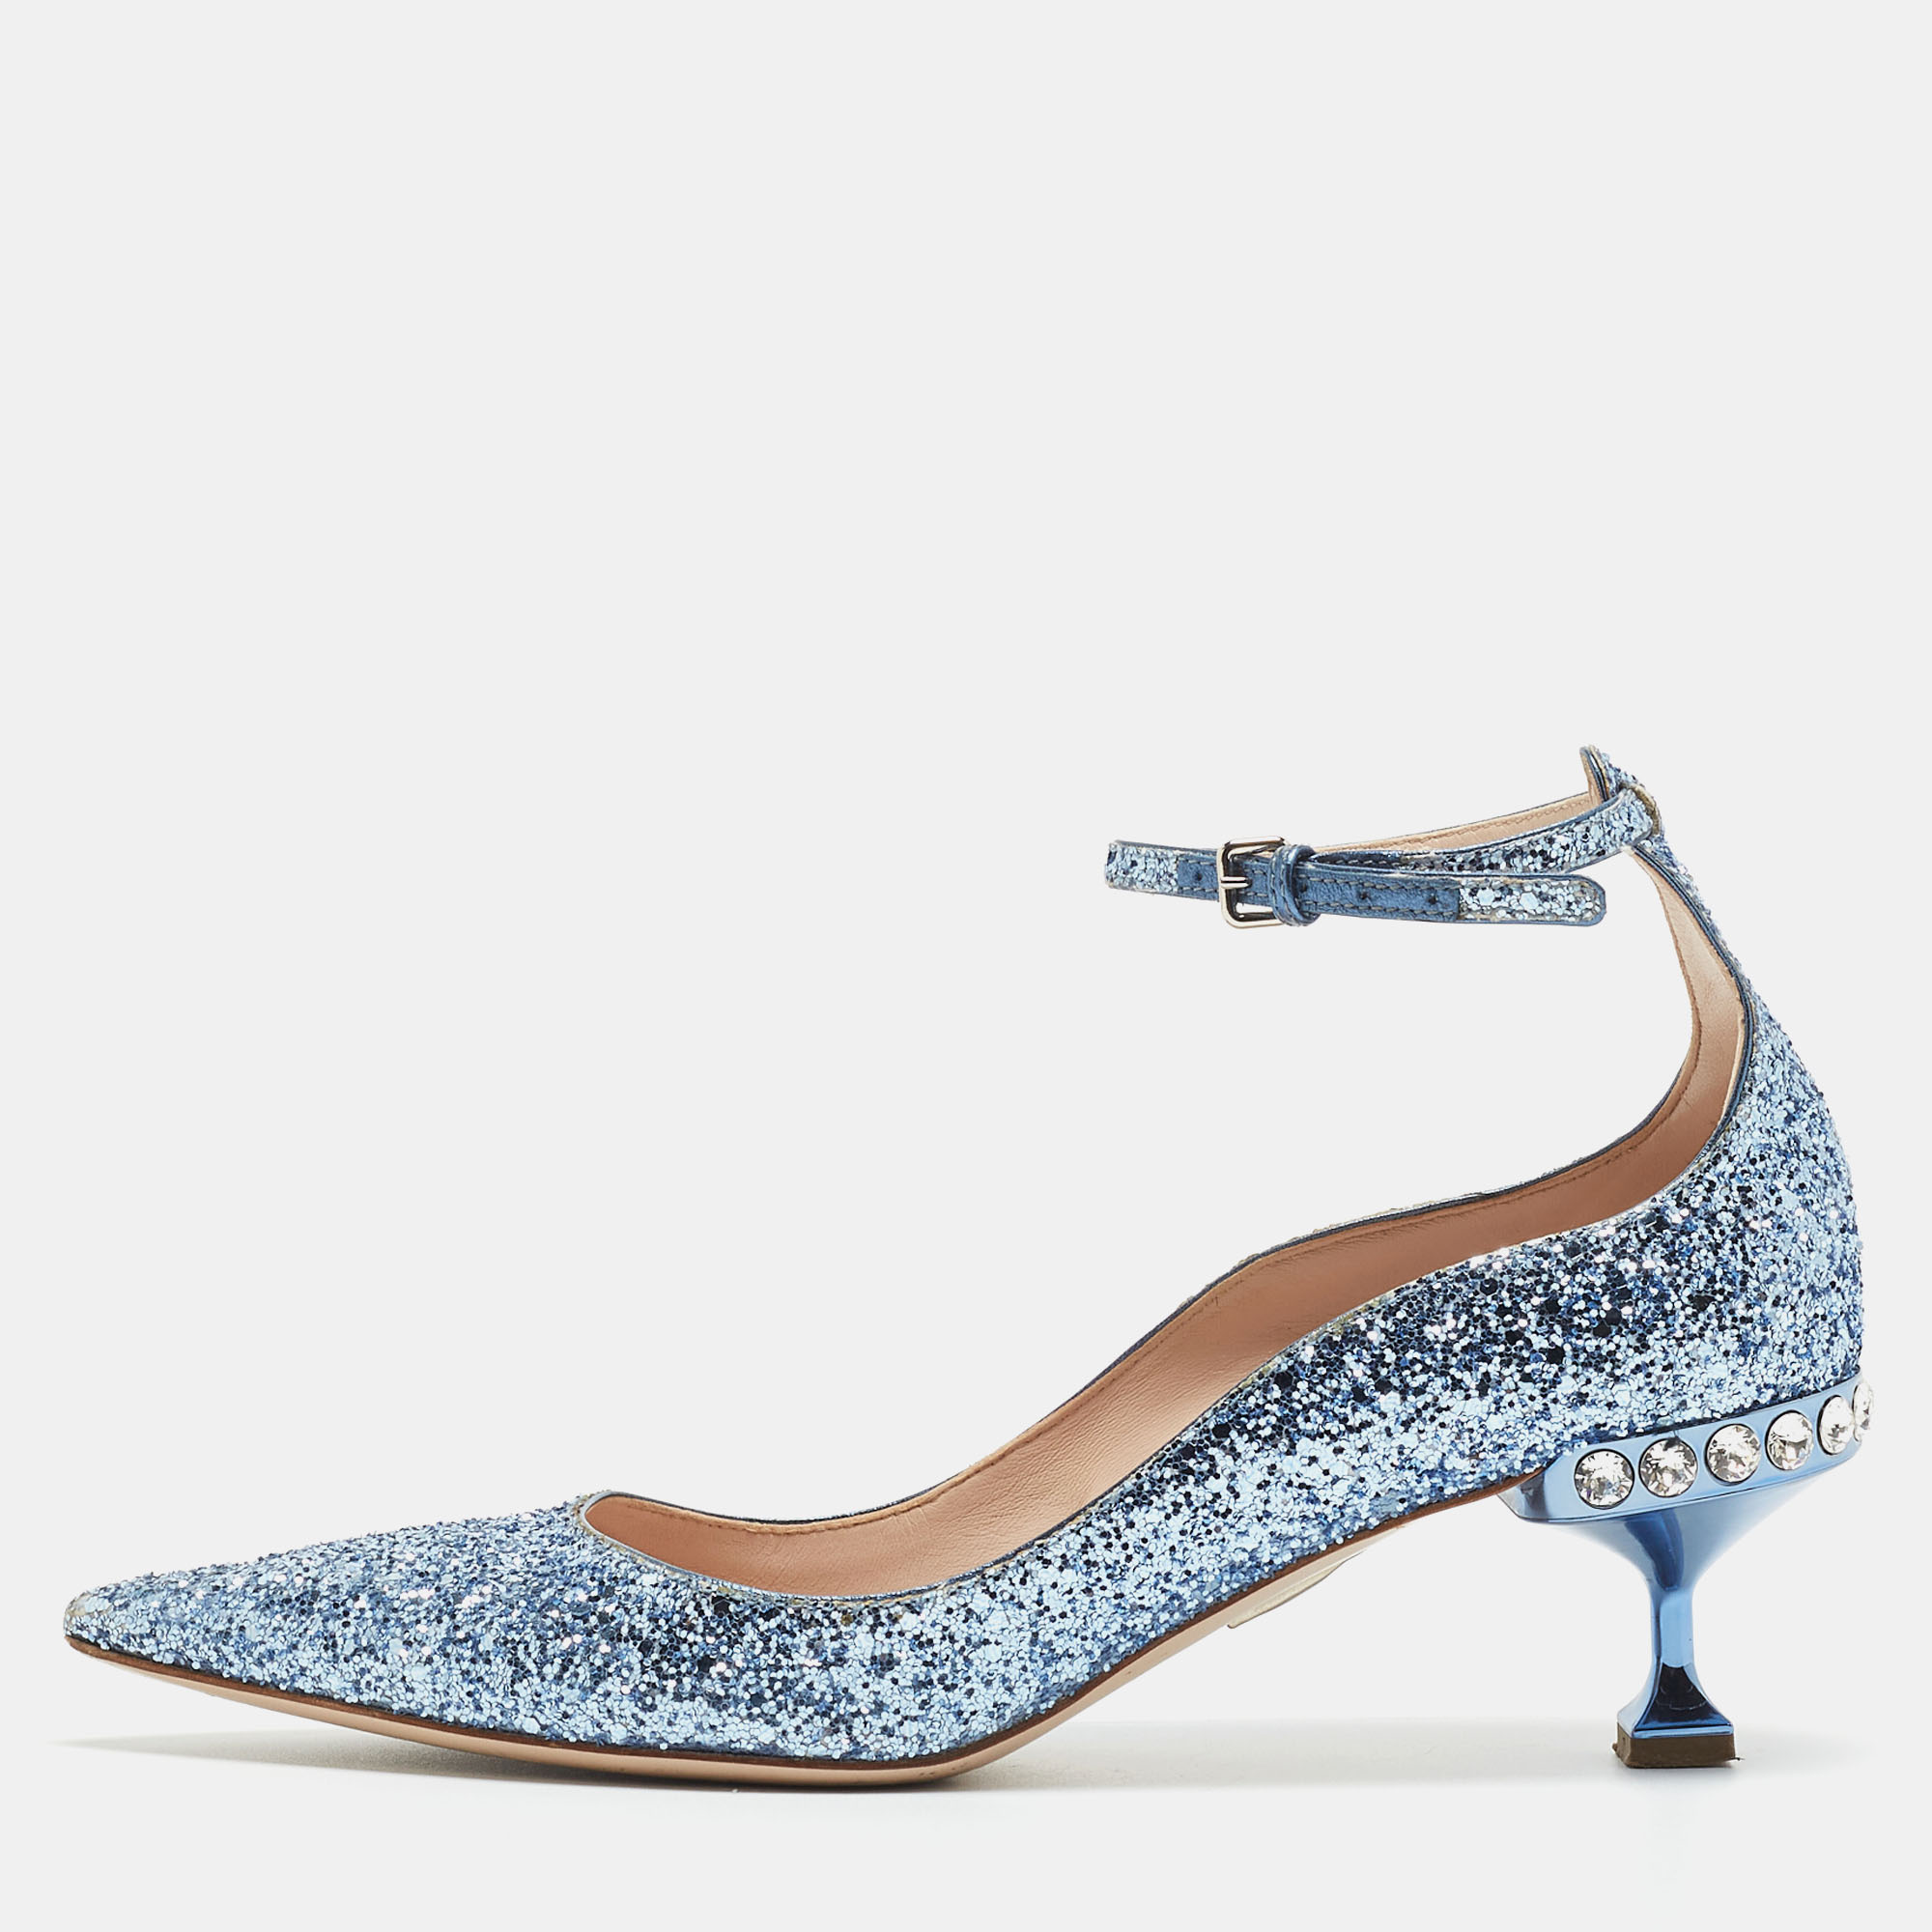 Pre-owned Miu Miu Blue Glitter Crystal Embellished Ankle Strap Pointed Toe Pumps Size 38